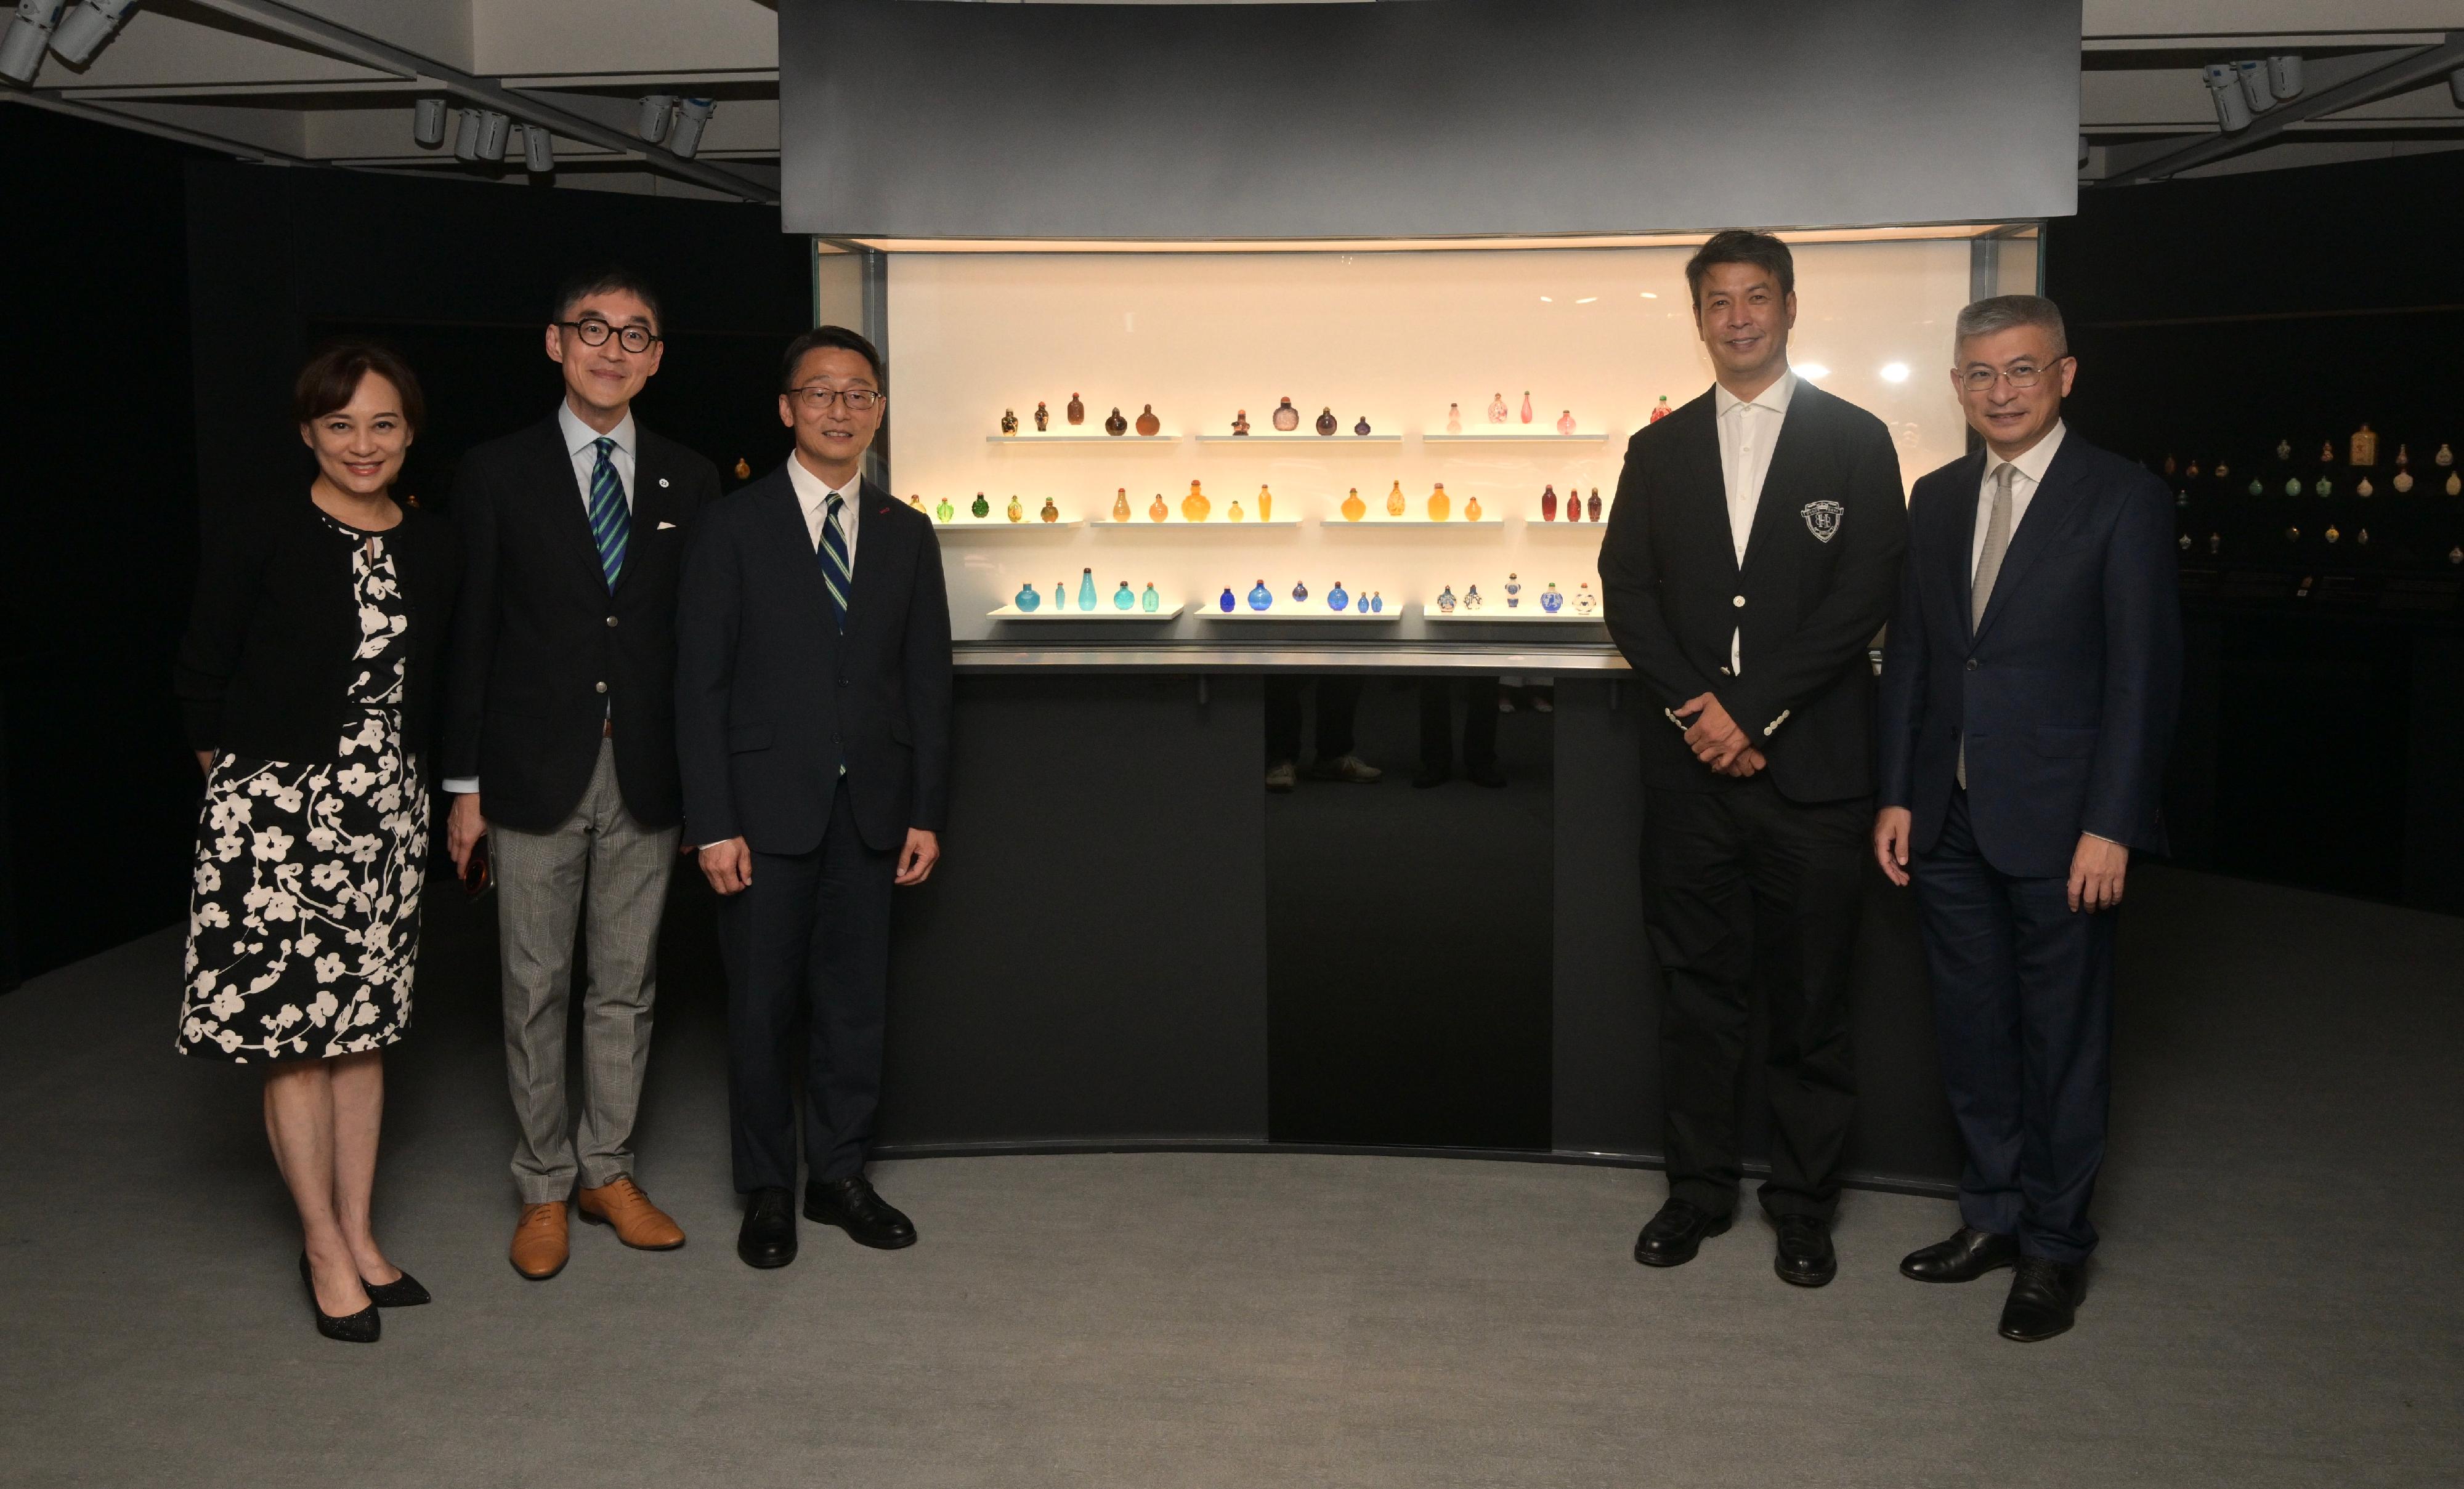 The opening ceremony of the "Art of Gifting: The Fuyun Xuan Collection of Chinese Snuff Bottles" exhibition and donation ceremony was held today (April 11) at the Hong Kong Museum of Art (HKMoA). Photo shows (from left) the Museum Director of the HKMoA, Dr Maria Mok; the Chairman of the Museum Advisory Committee, Professor Douglas So; the Director of Leisure and Cultural Services, Mr Vincent Liu; the son of Mr Christopher Sin and Mrs Josephine Sin, Mr Nicholas Sin; and the Under Secretary for Culture, Sports and Tourism, Mr Raistlin Lau.